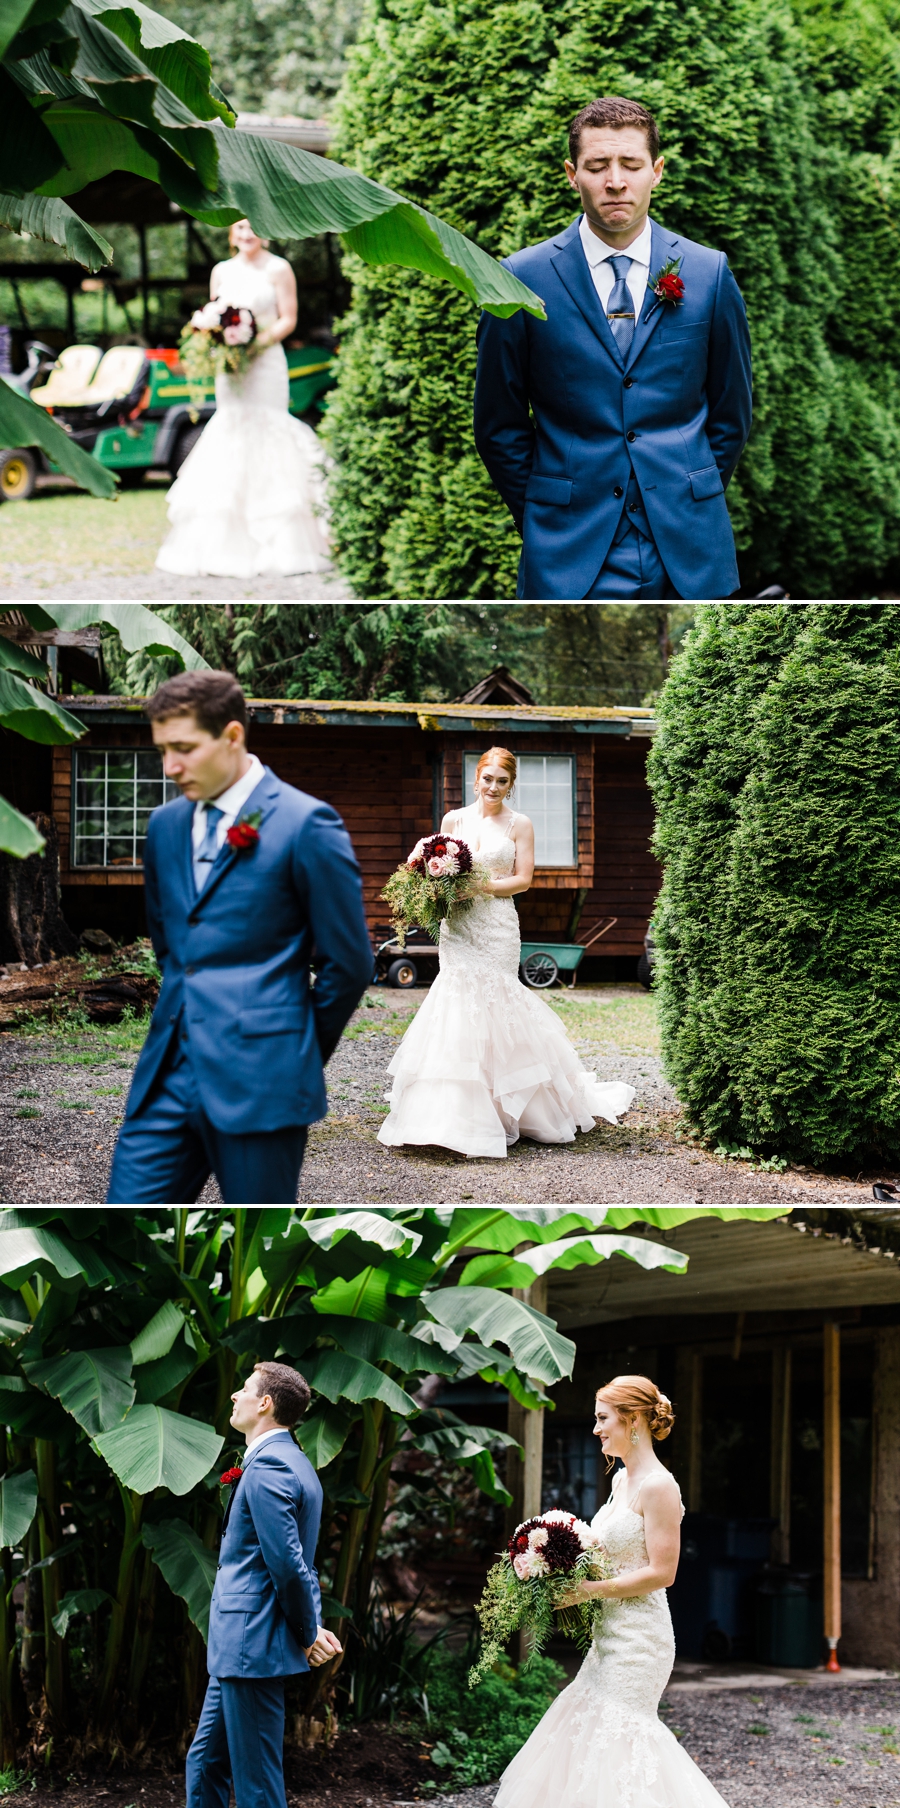 Emotional first look at Maroni Meadows wedding venue in Snohomish by Seattle wedding photographer Amy Galbraith